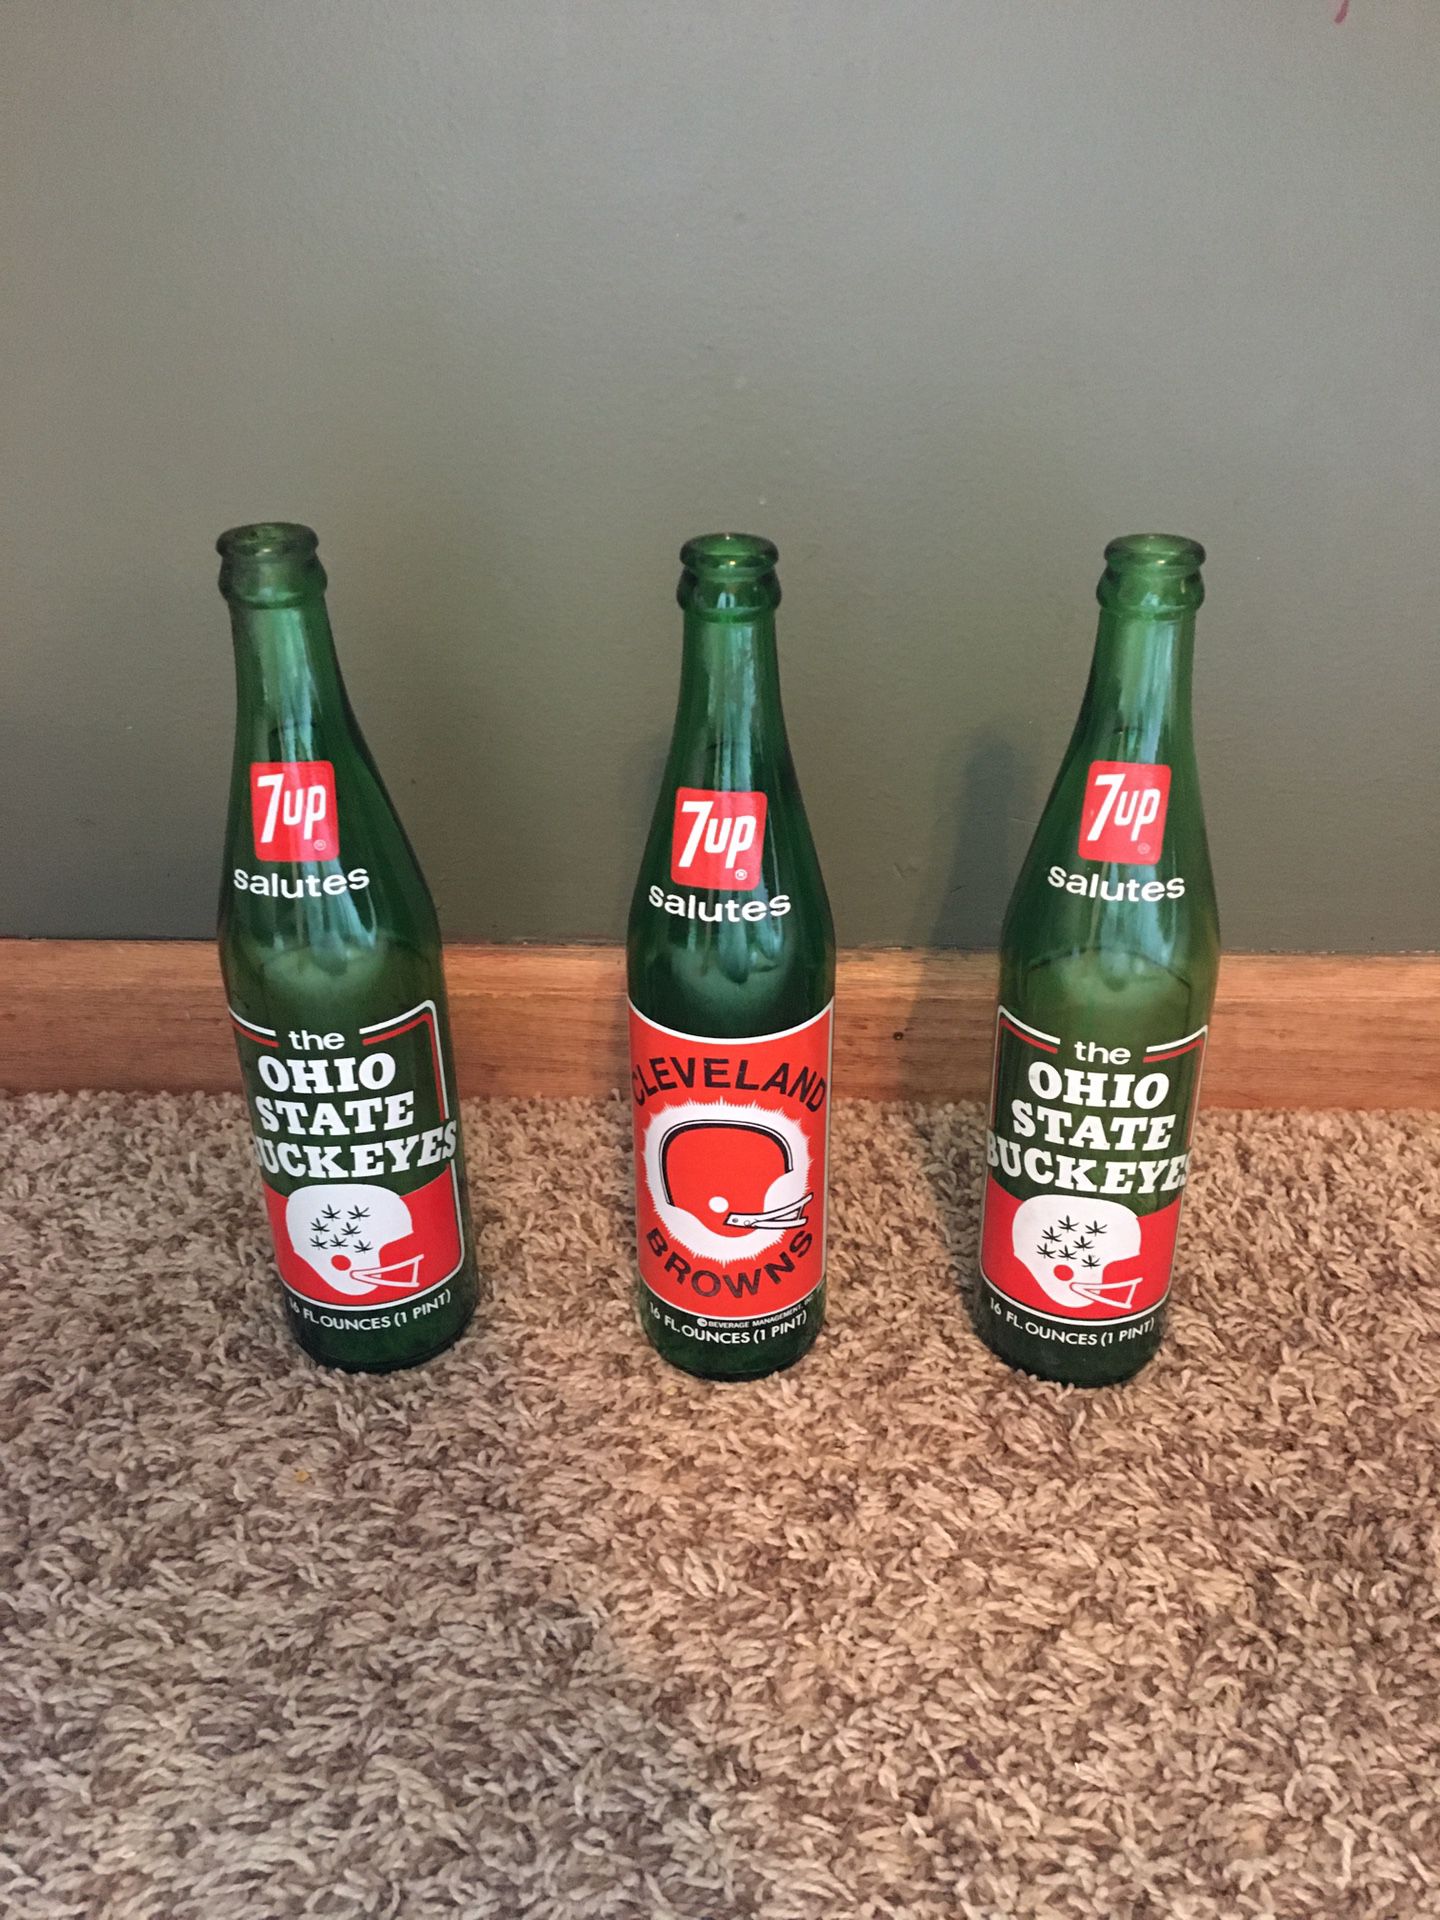 Ohio State Buckeyes Cleveland Browns 1973 Bottles - Parma Hts 